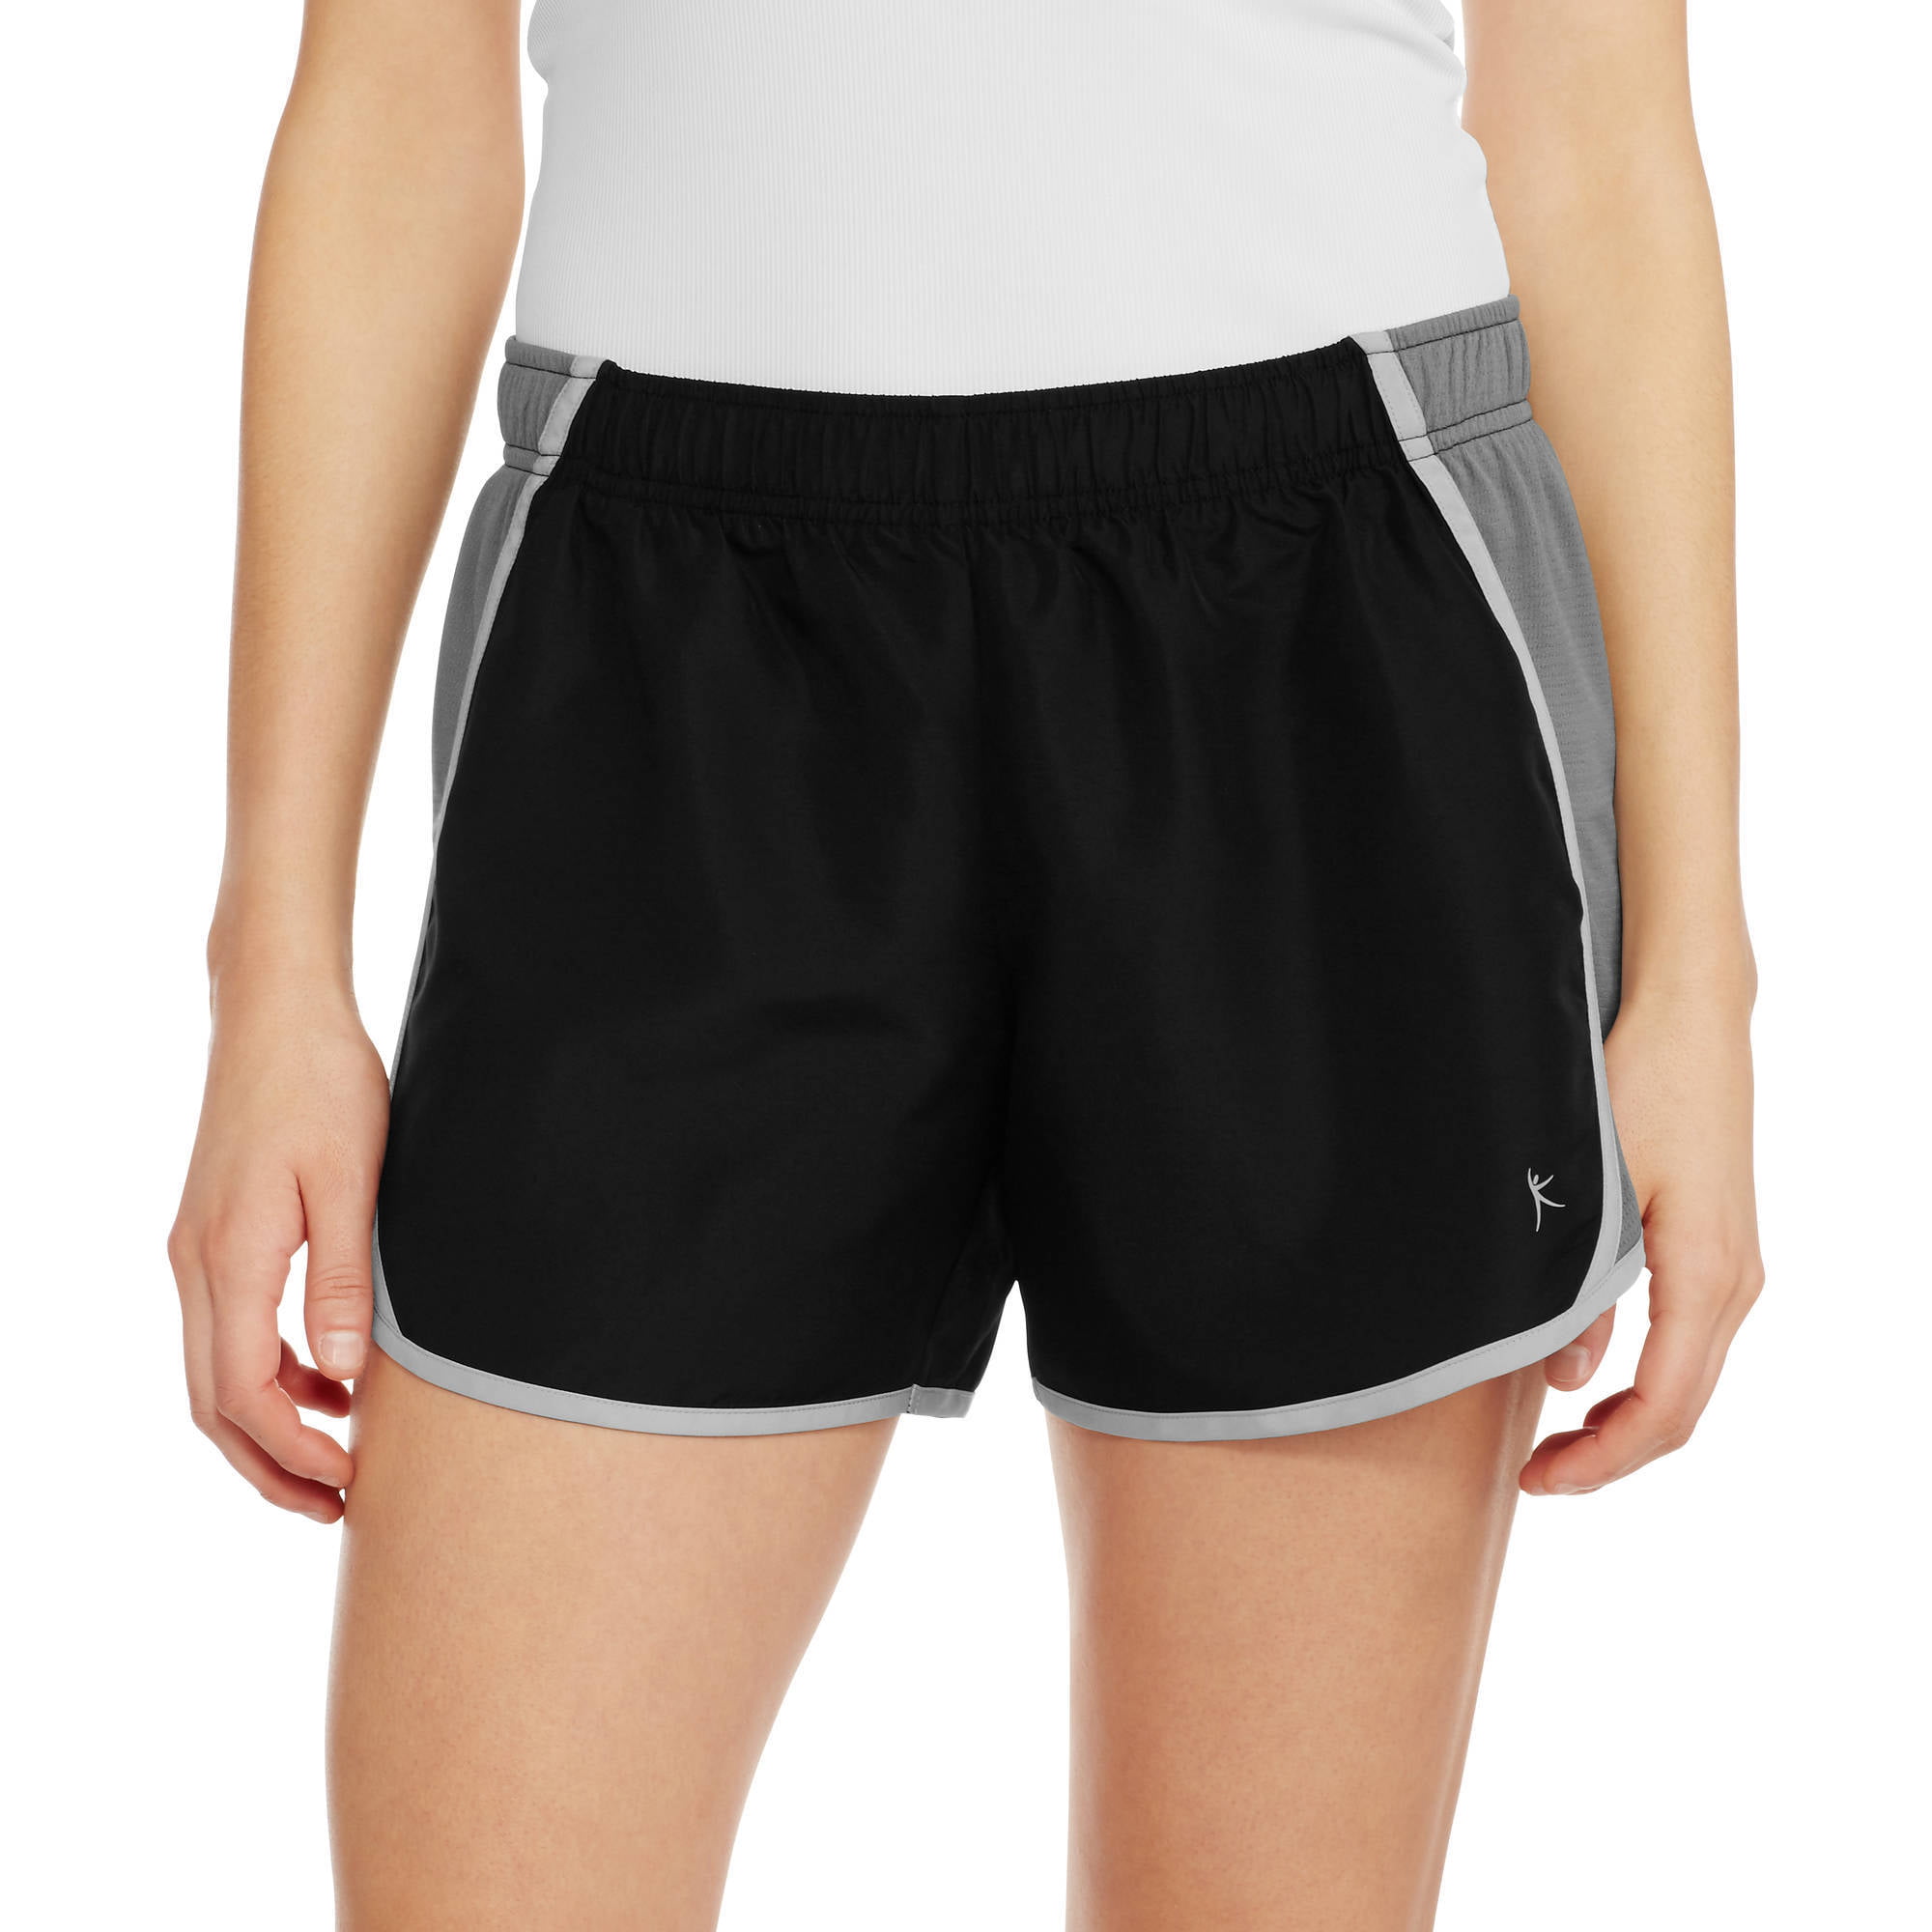 Danskin Now 100% Polyester Gray Athletic Shorts Size 4 - 6 - 11% off